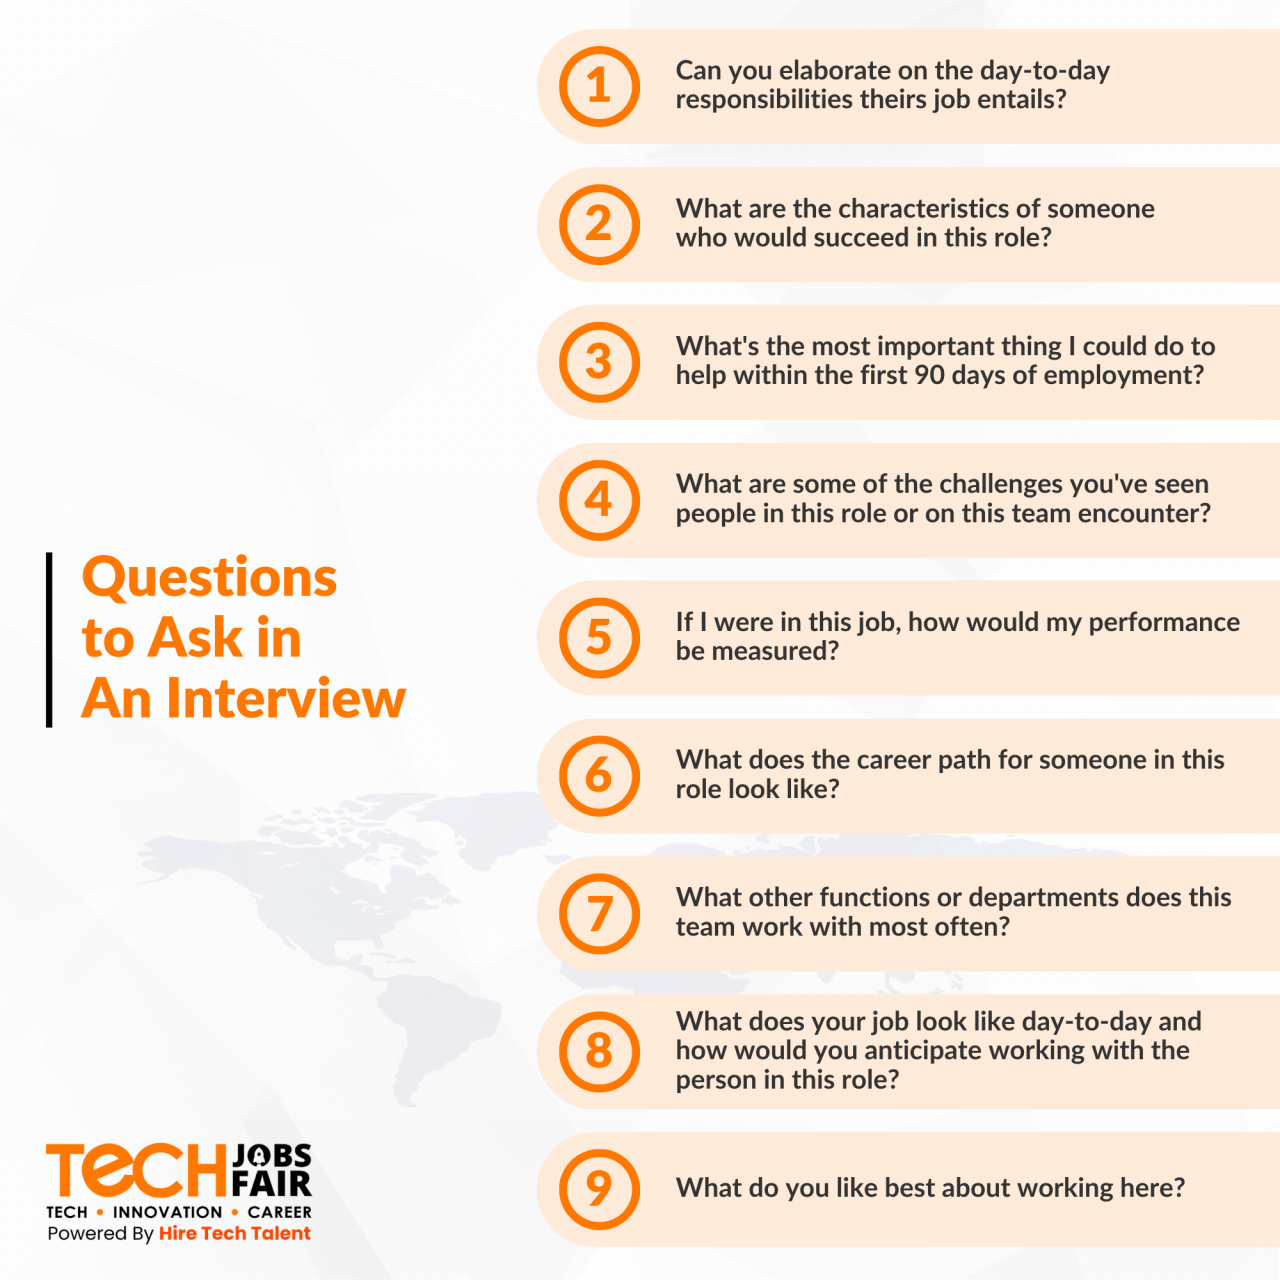 10 questions that an interviewer would ask